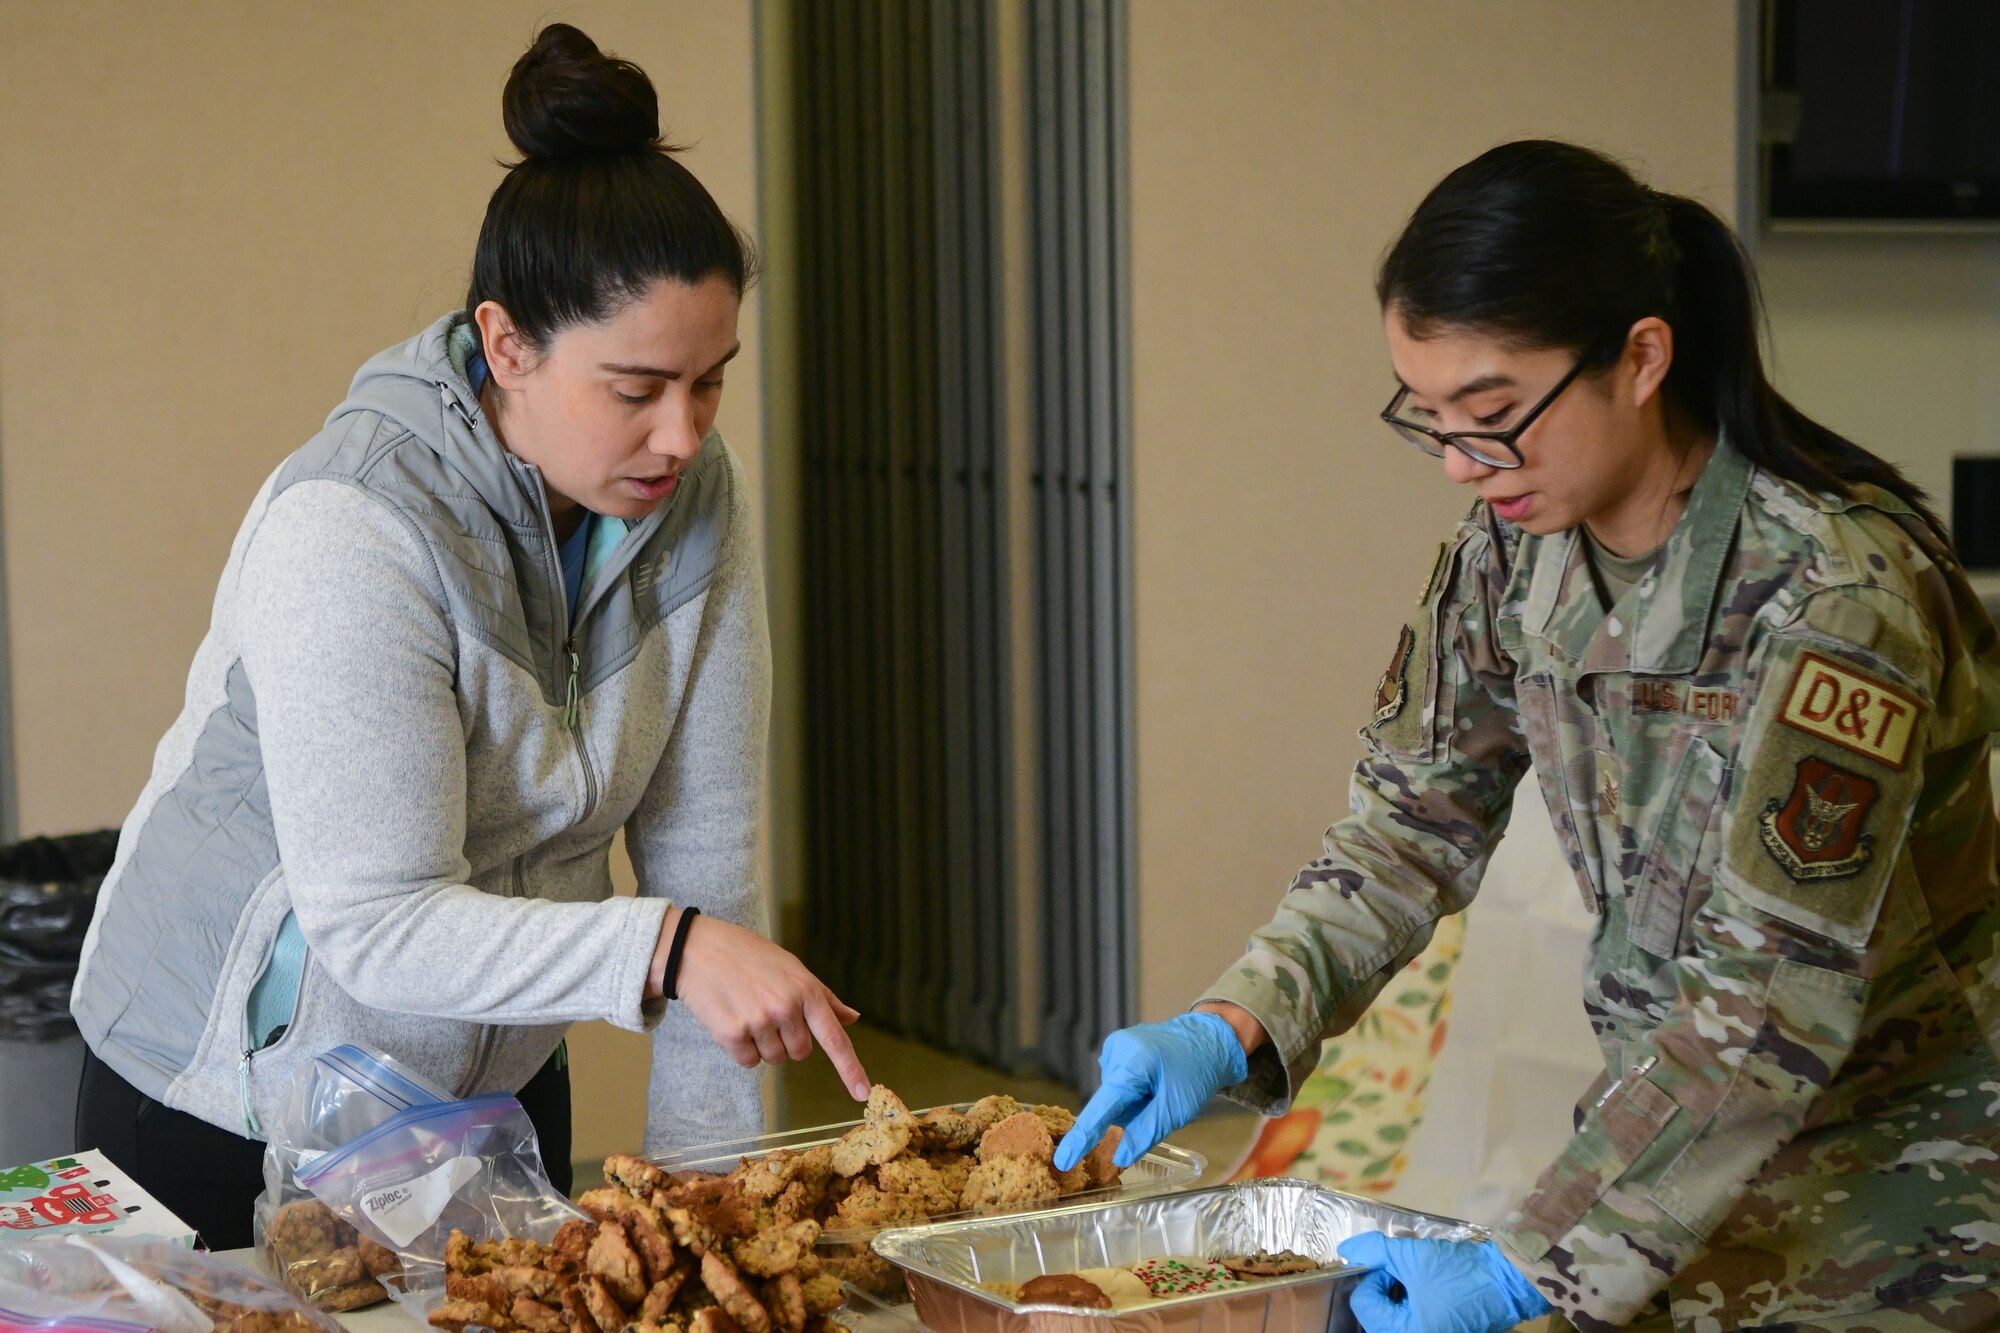 Jennifer Borrego (left) and Tech. Sgt. Michelle Lee package cookies for the Cookie Crunch in the Foothills Chapel on Beale Air Force Base, Calif. on Dec. 16, 2022.